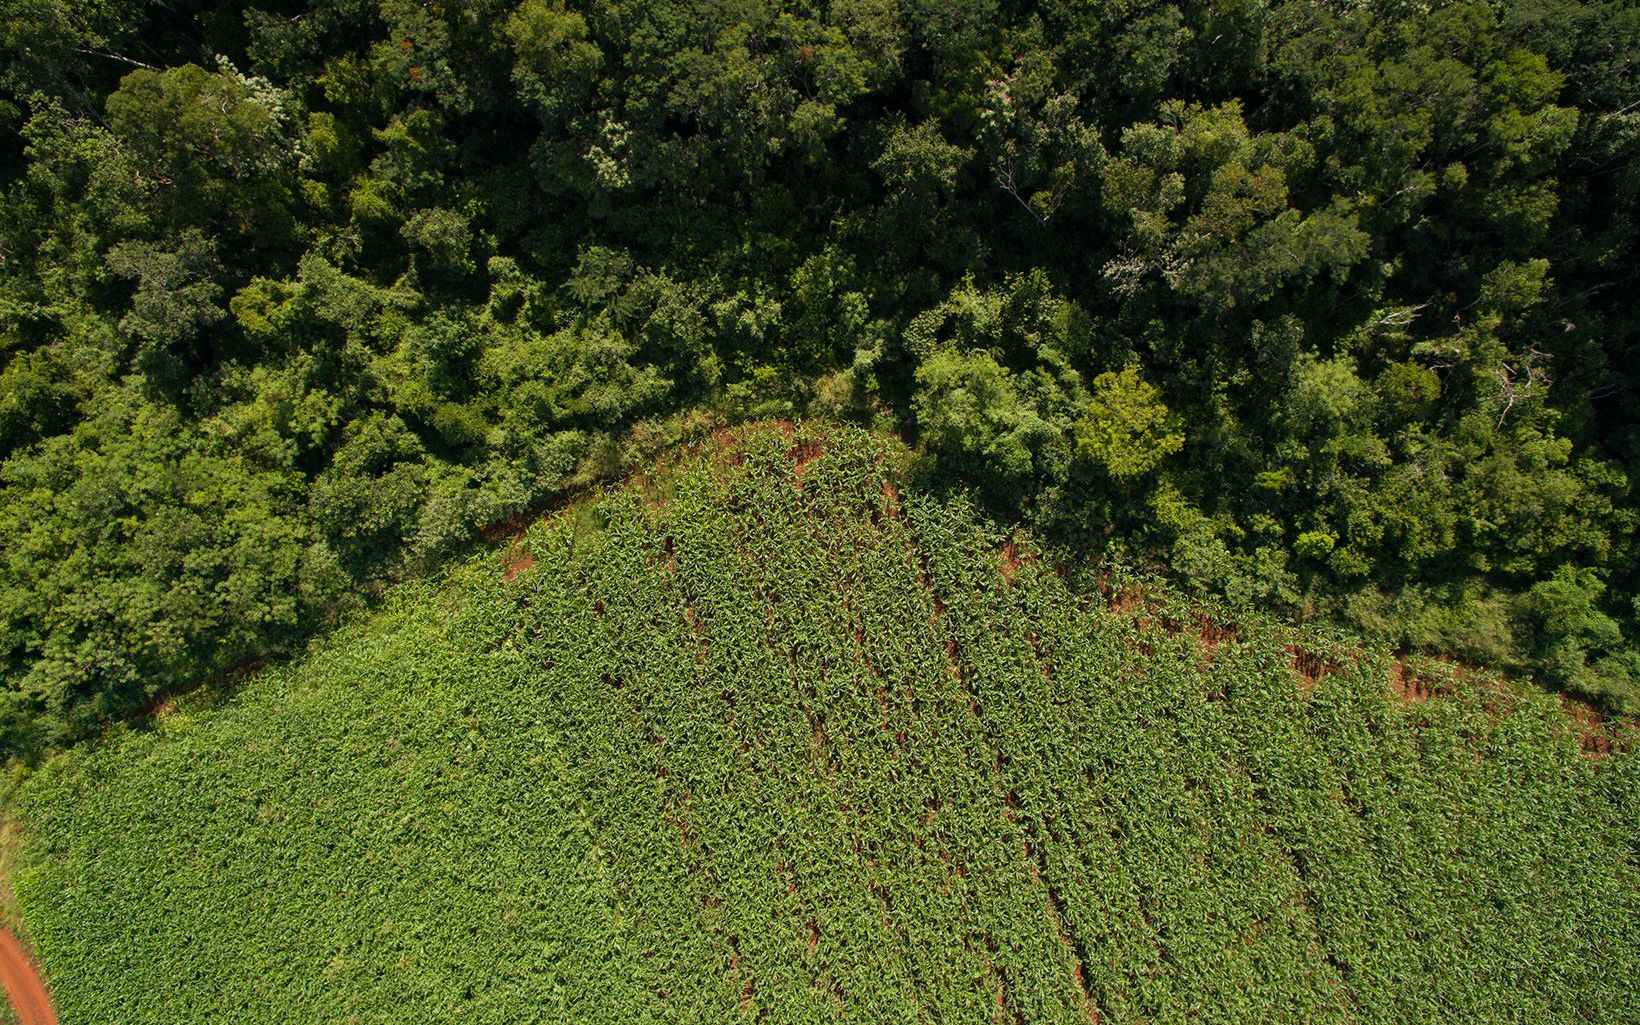 Yucatan, Mexico Trees planted along the edge of farmland to promote agroforestry.  © Erich Schlegel